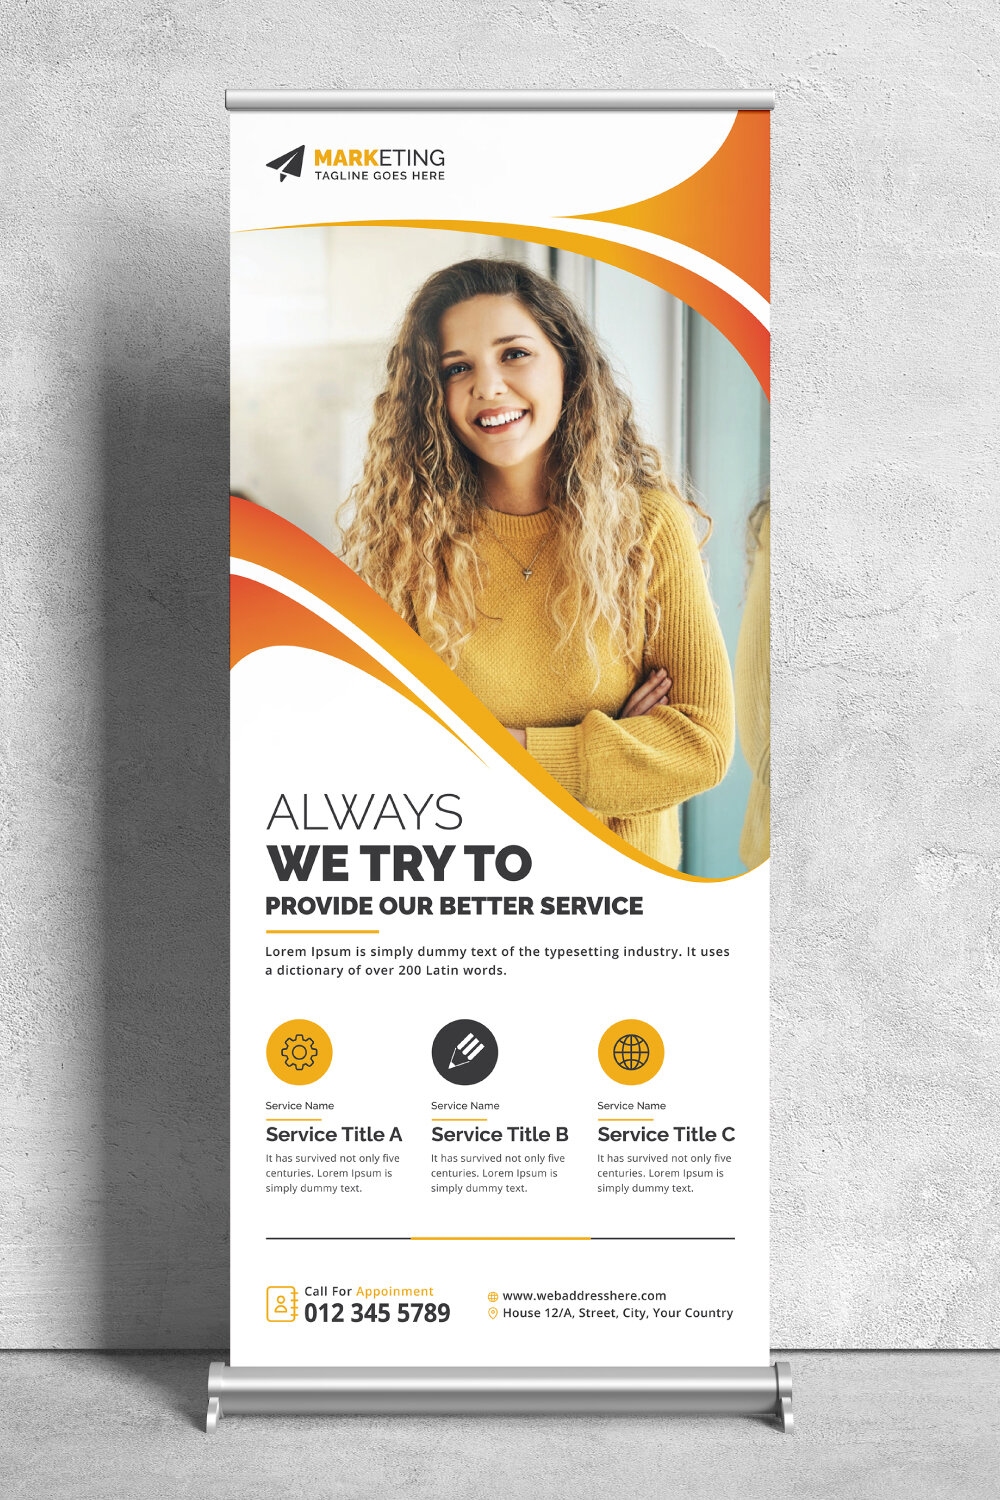 Image of corporate roll up banner in enchanting yellow design